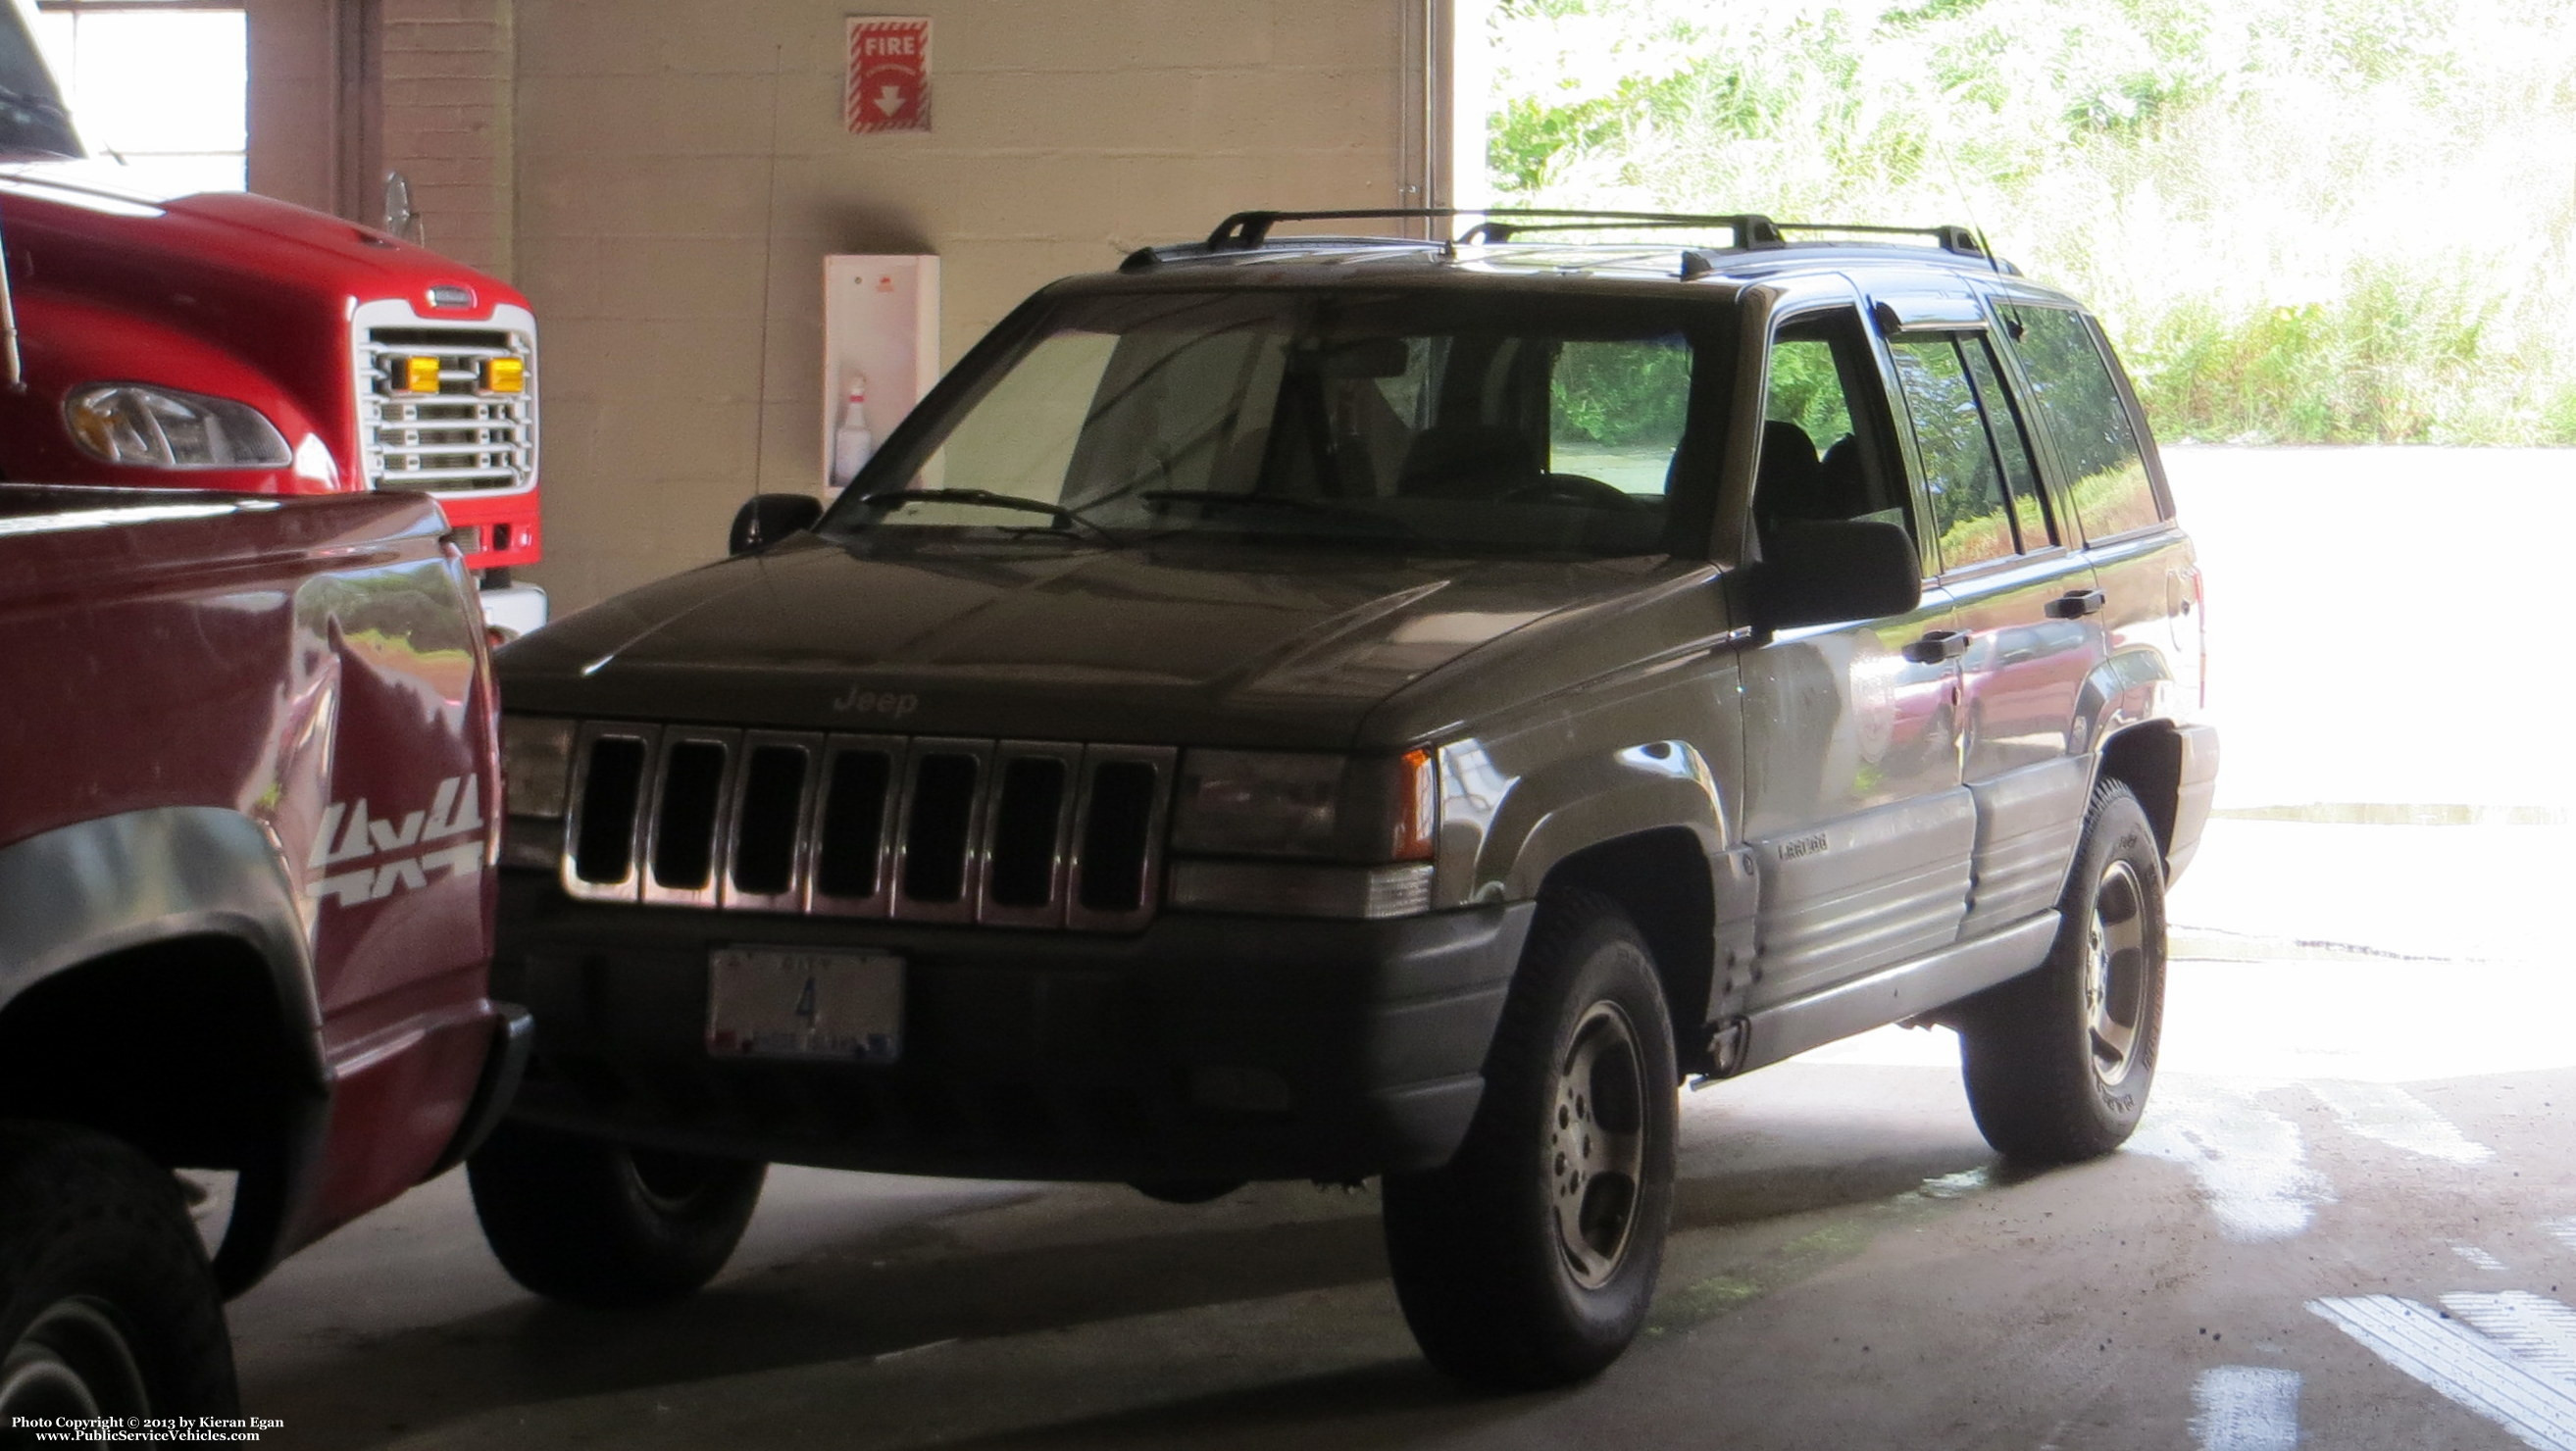 A photo  of Providence Sewer Division
            Car 4, a 1993-1998 Jeep Grand Cherokee             taken by Kieran Egan